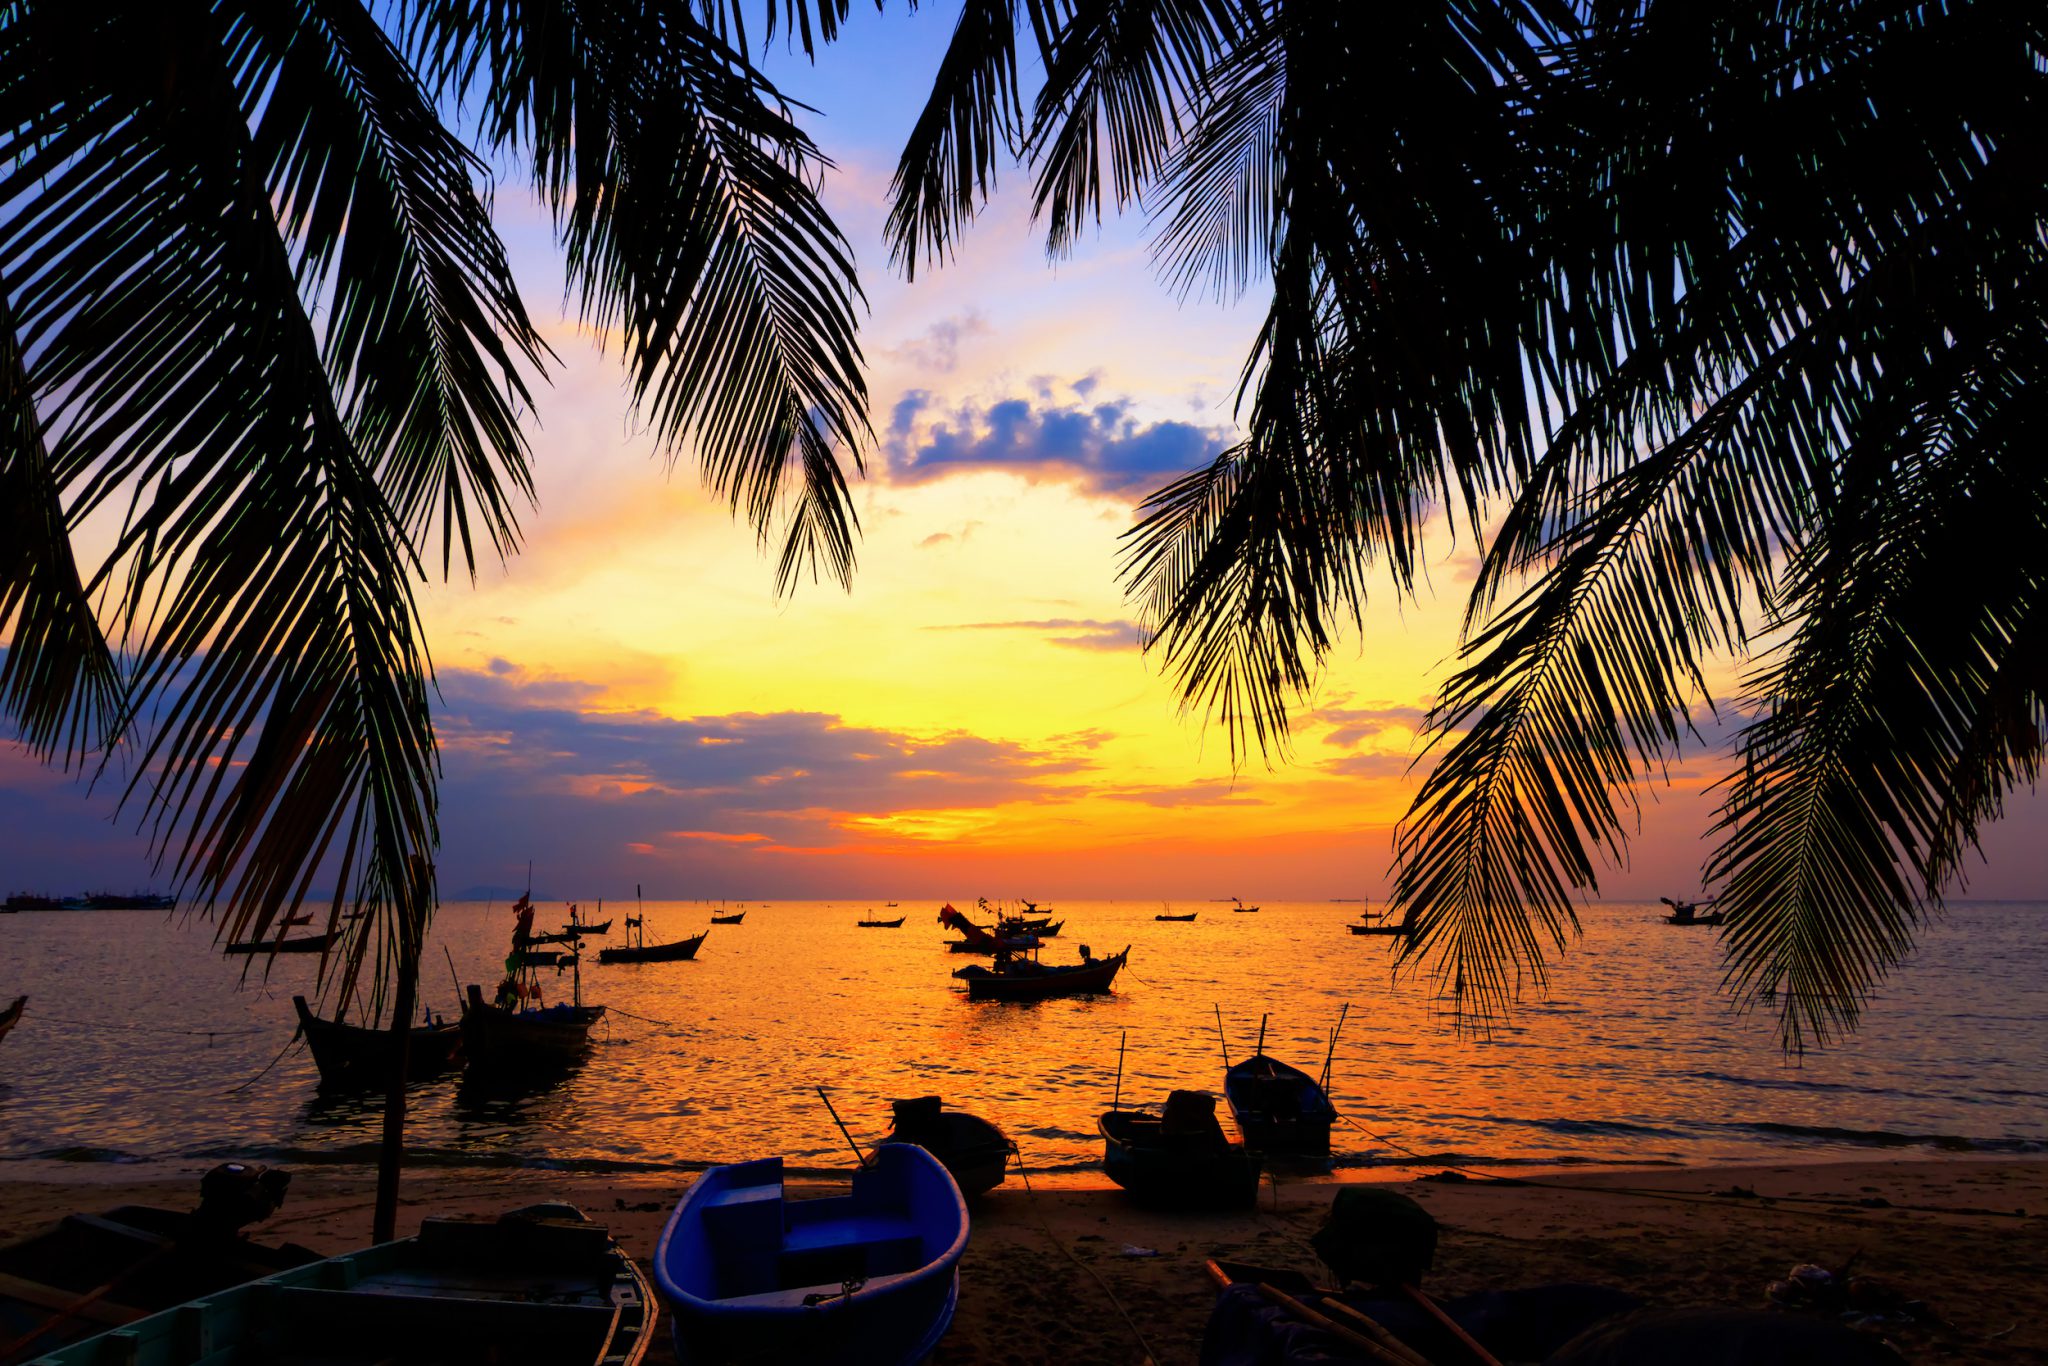 A sunset over a beach in Koh Tao, Thailand, one of the best free diving places in the world for marine life and beauty